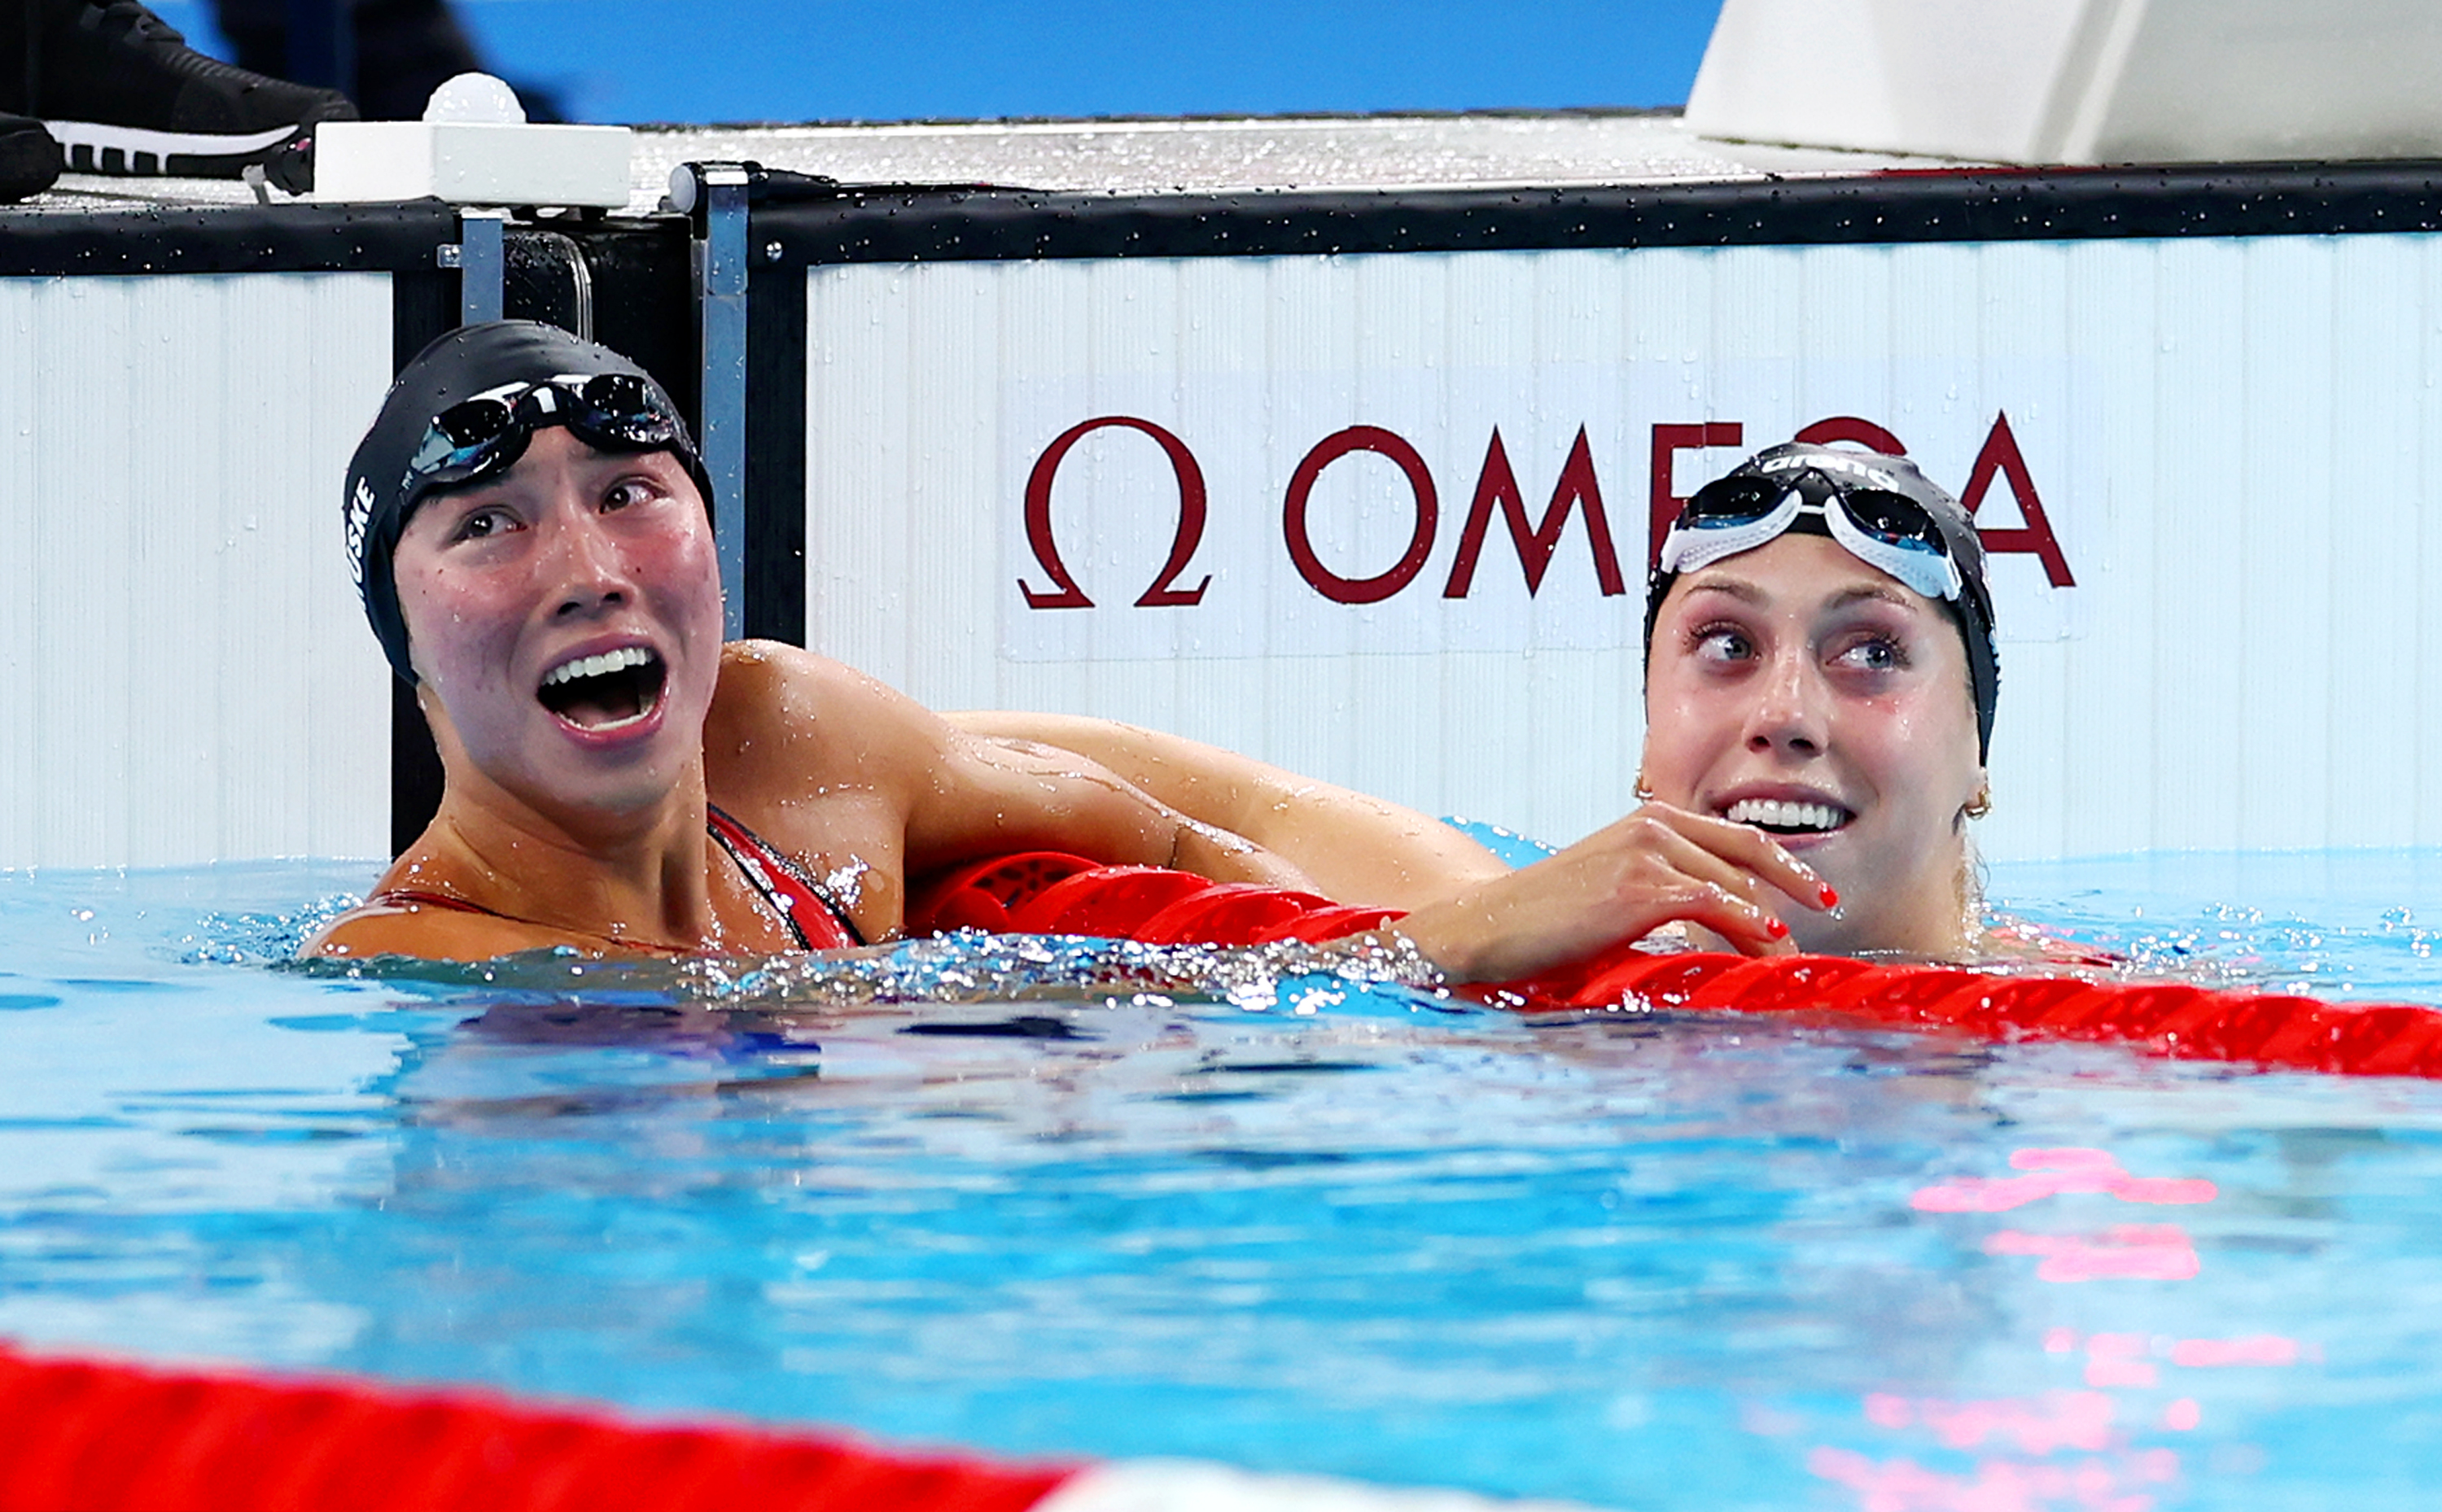 Torri Huske inches out teammate Gretchen Walsh to take Olympic gold in 100m butterfly final